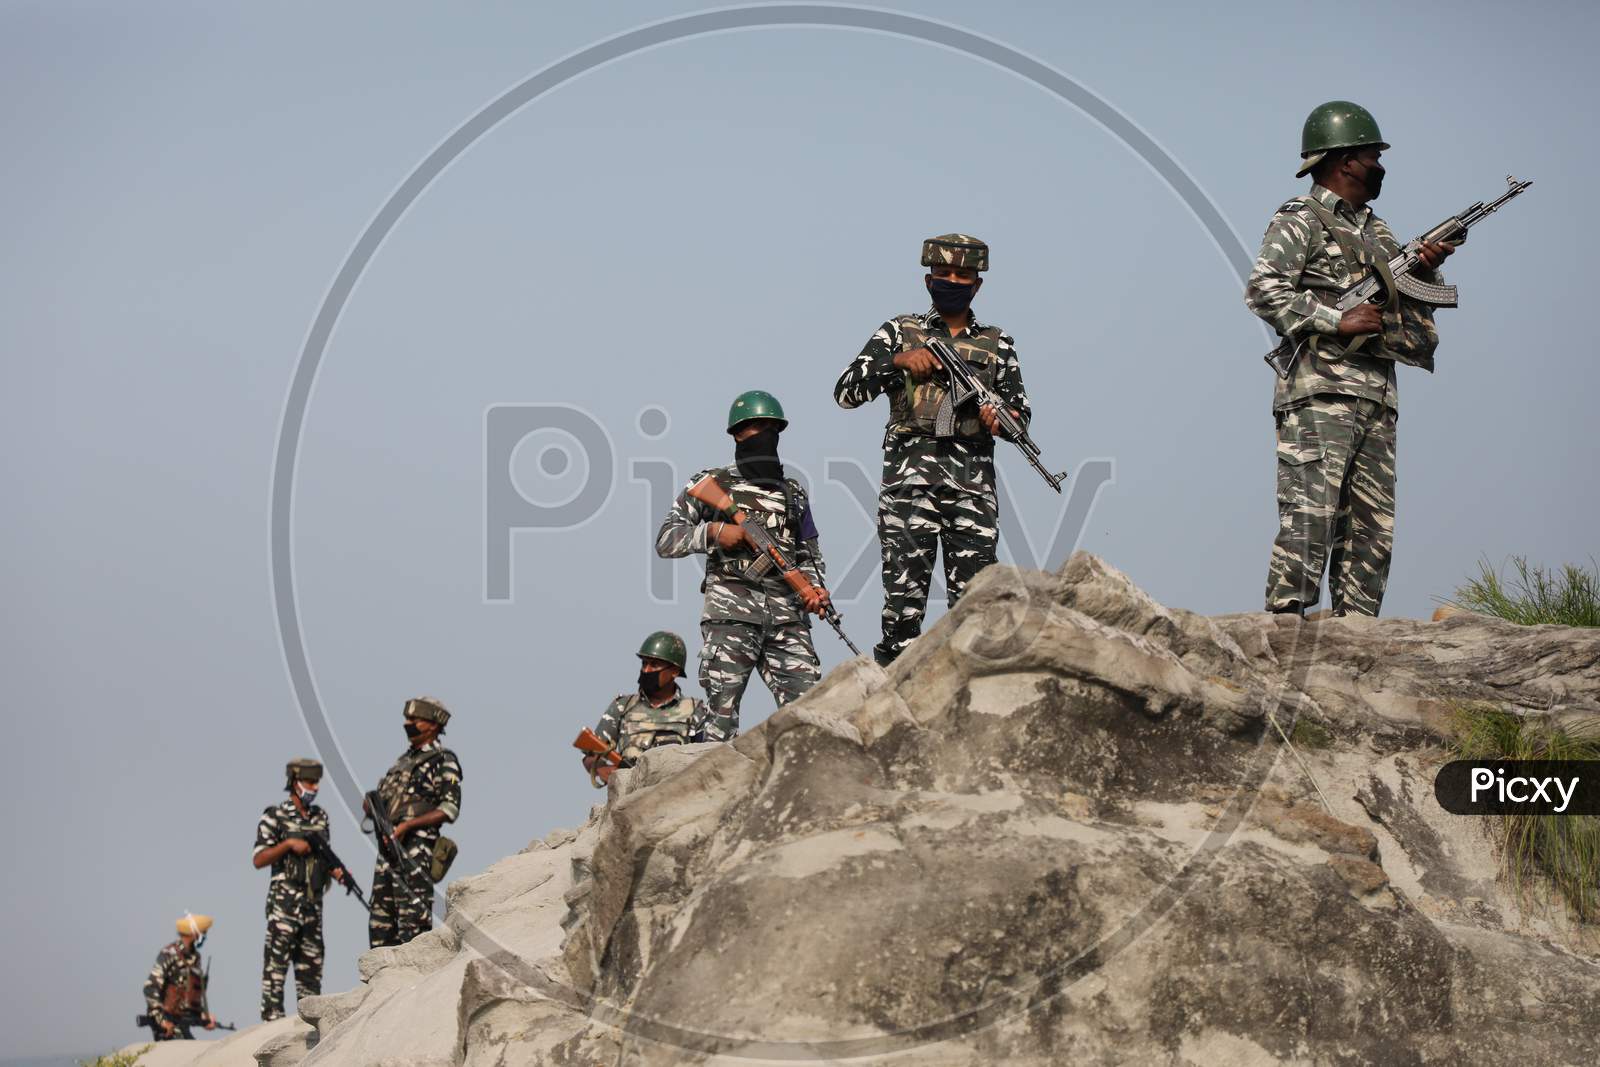 Soldiers of the Central Reserve Police Force(CRPF) patrol the Jammu and Kashmir National Highway ahead of the upcoming Amarnath yatra in Jammu on July 14, 2020